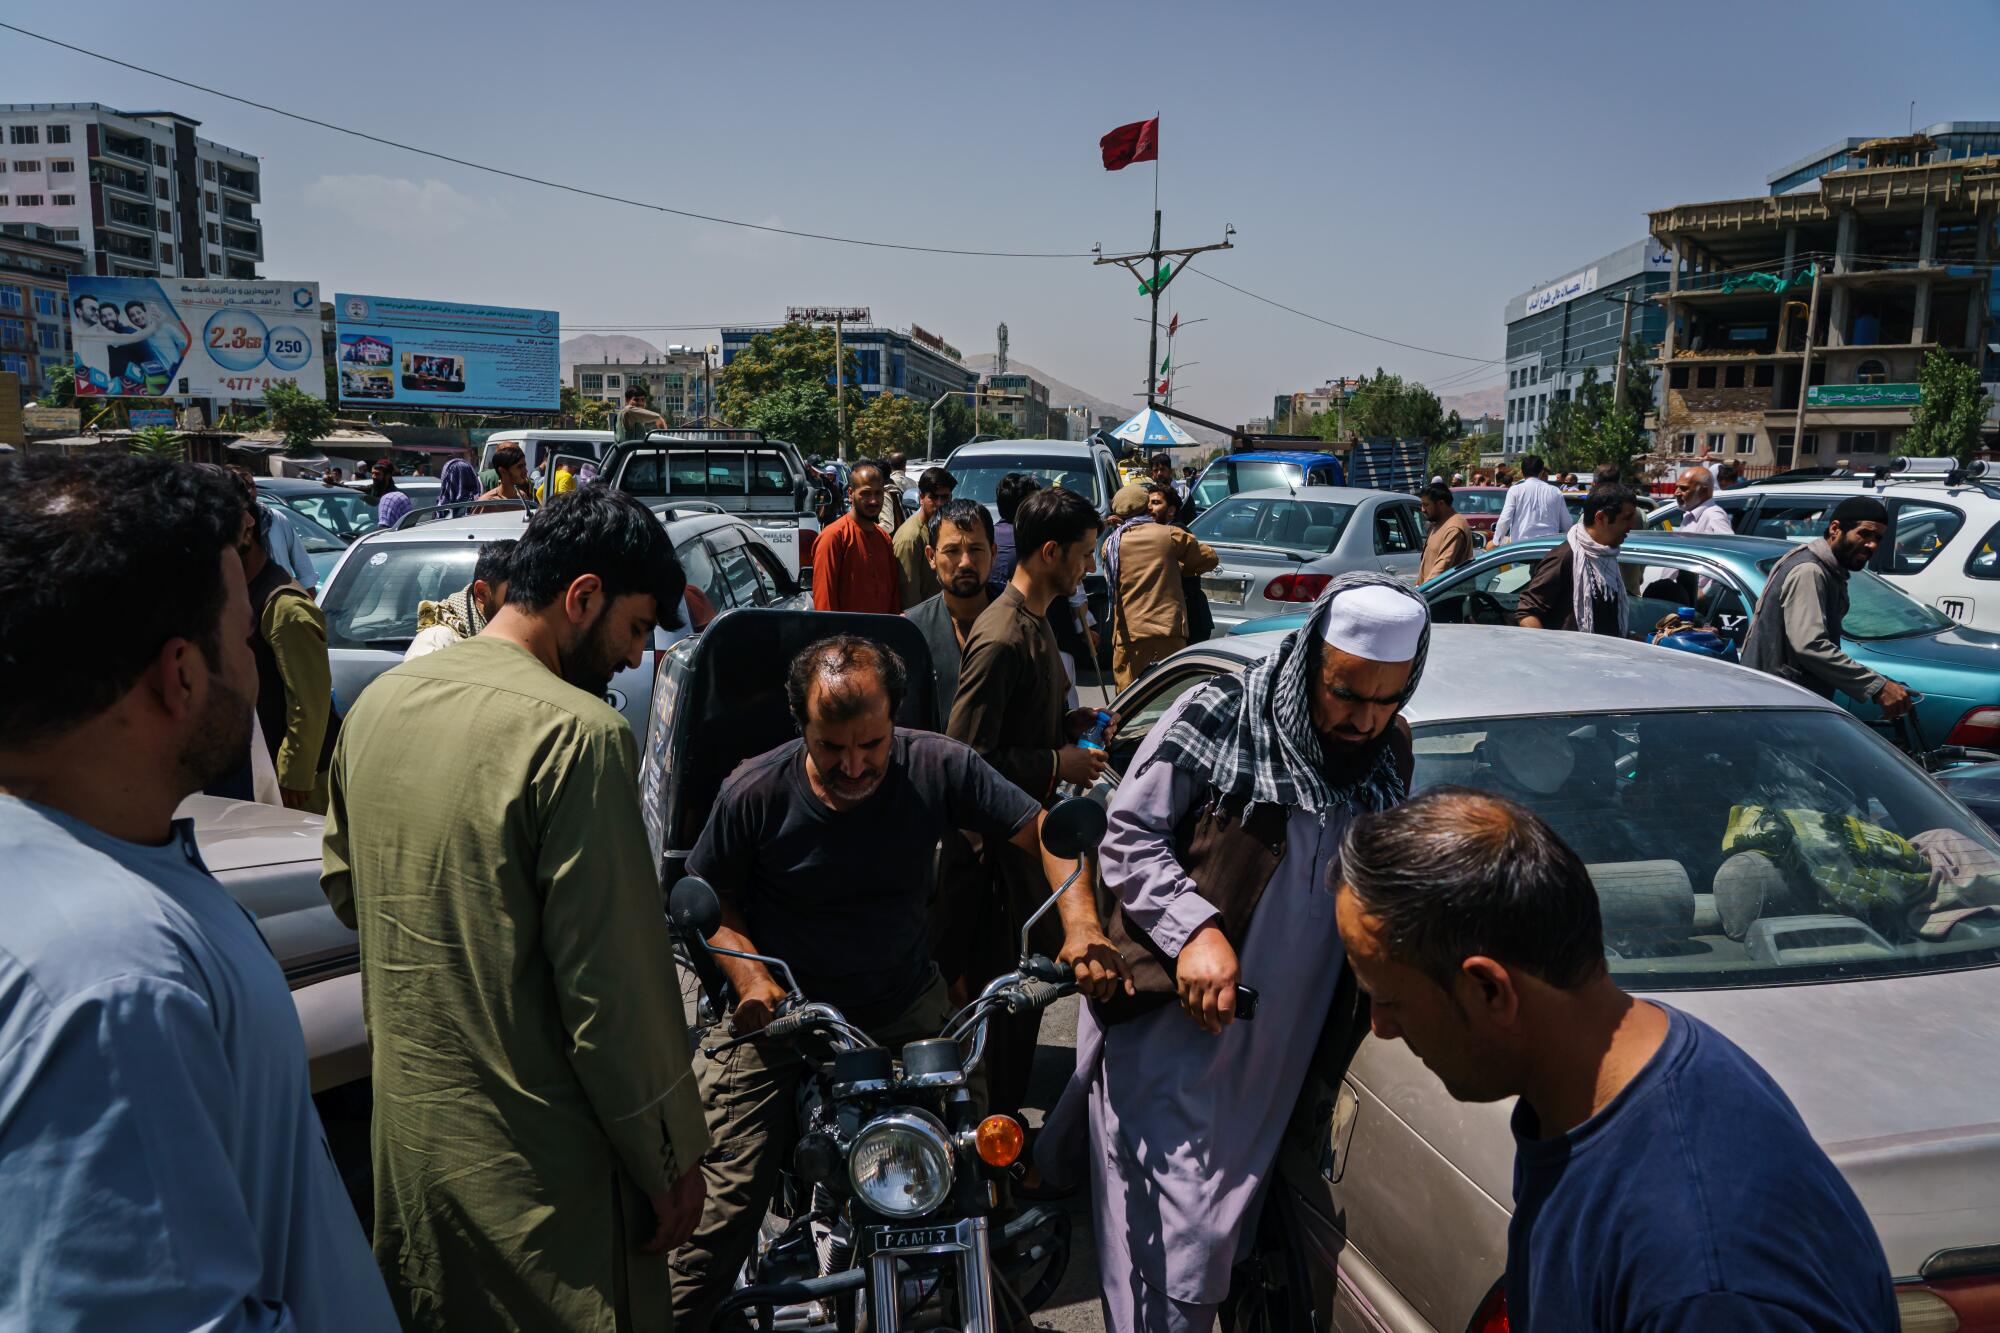 Pedestrians and motorists ended up in a traffic gri lock as Afghans rush to safety 